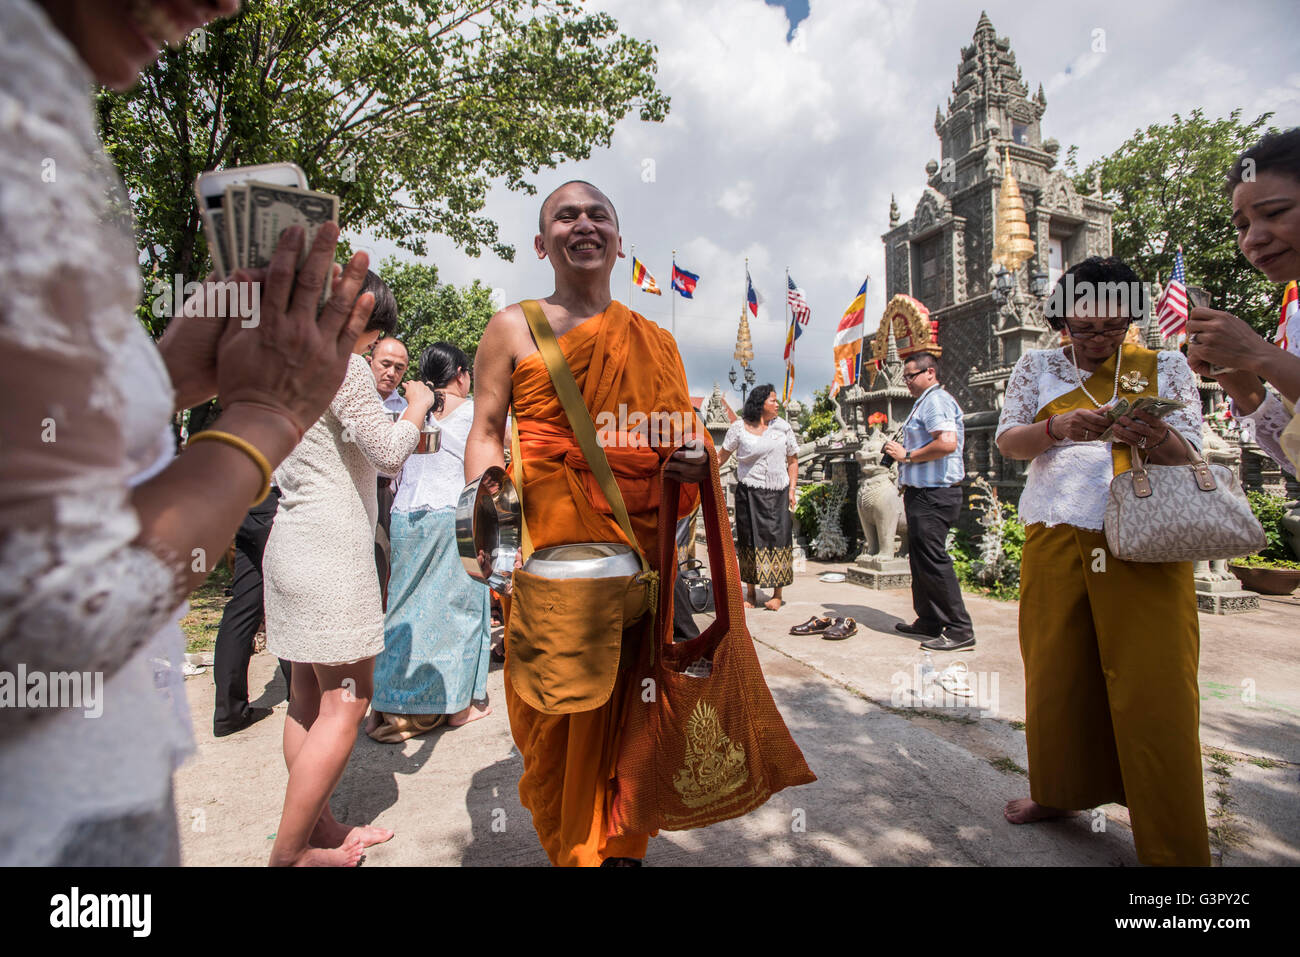 A Buddhist Monk receives food and money offerings during the Cambodian Festival, in Dallas, Tx. June 11, 2016. Stock Photo